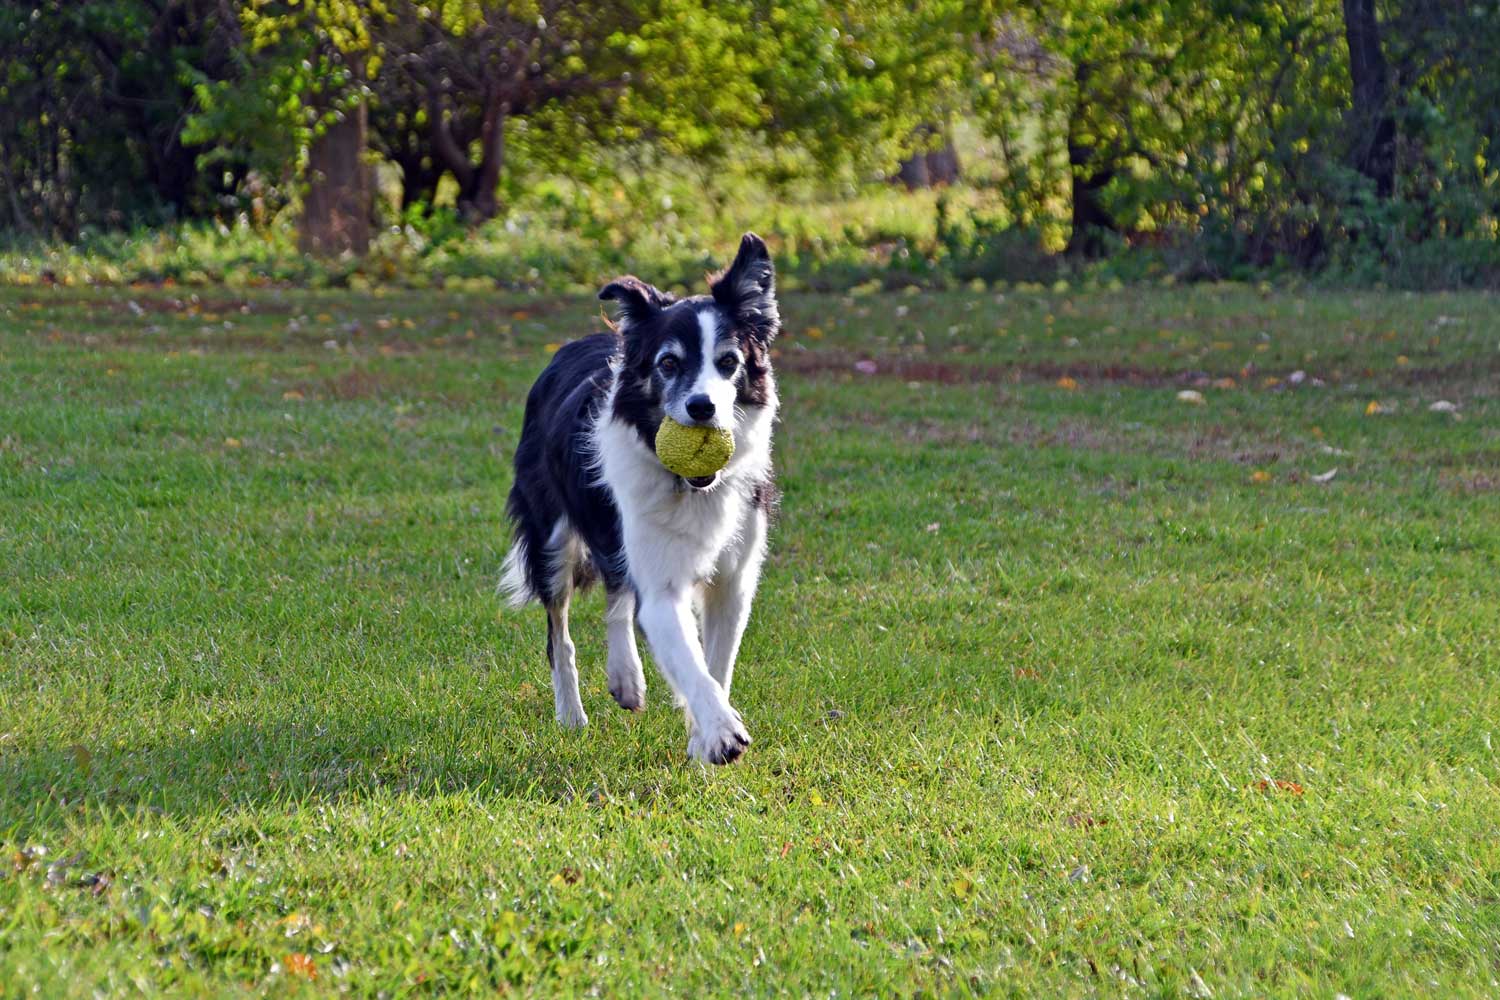 A dog running at dog park with a ball in its mouth.